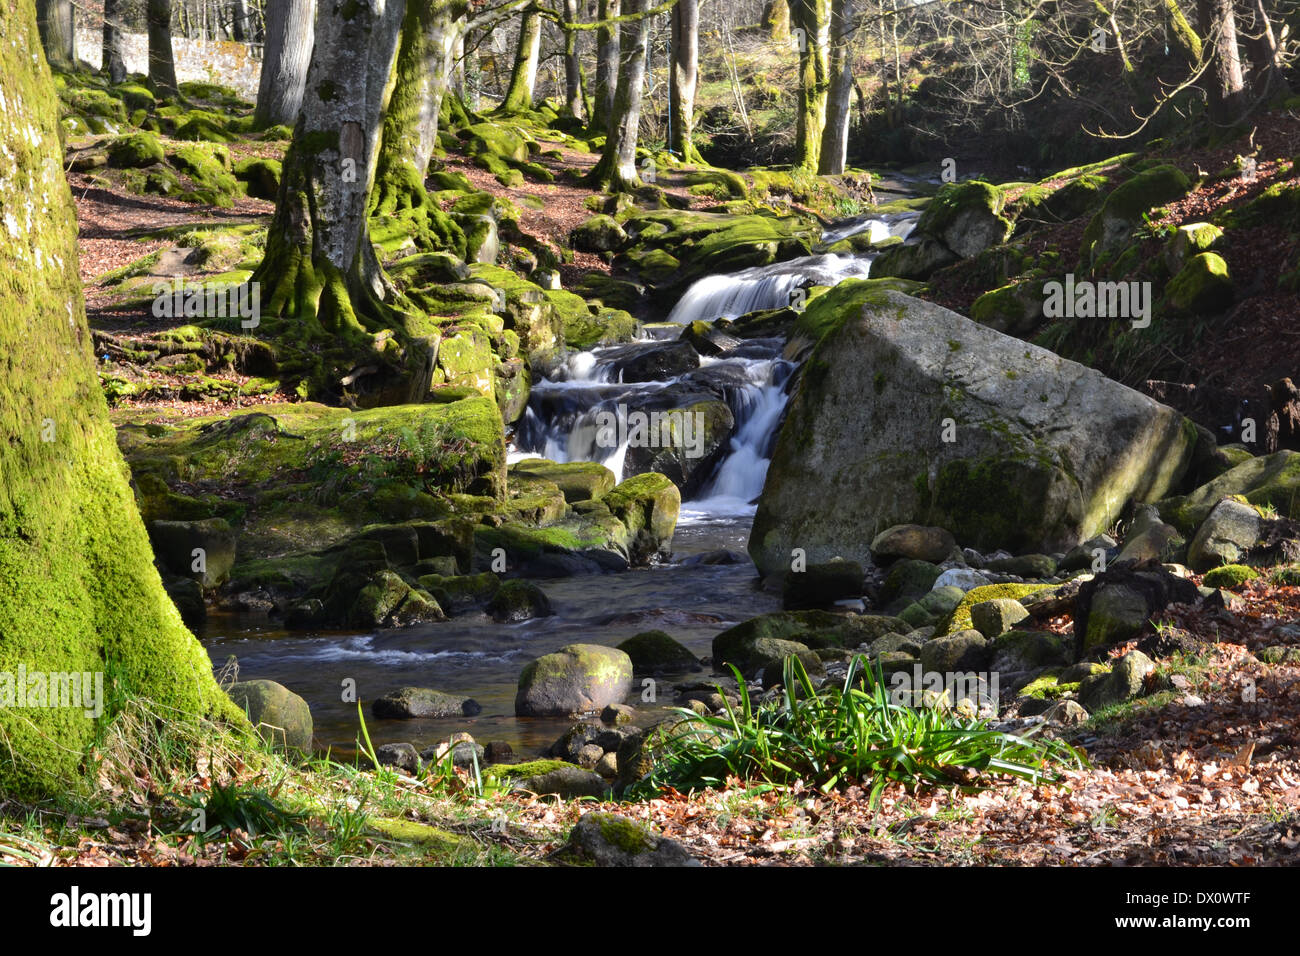 flowing river through a forestry in wicklow ireland Stock Photo